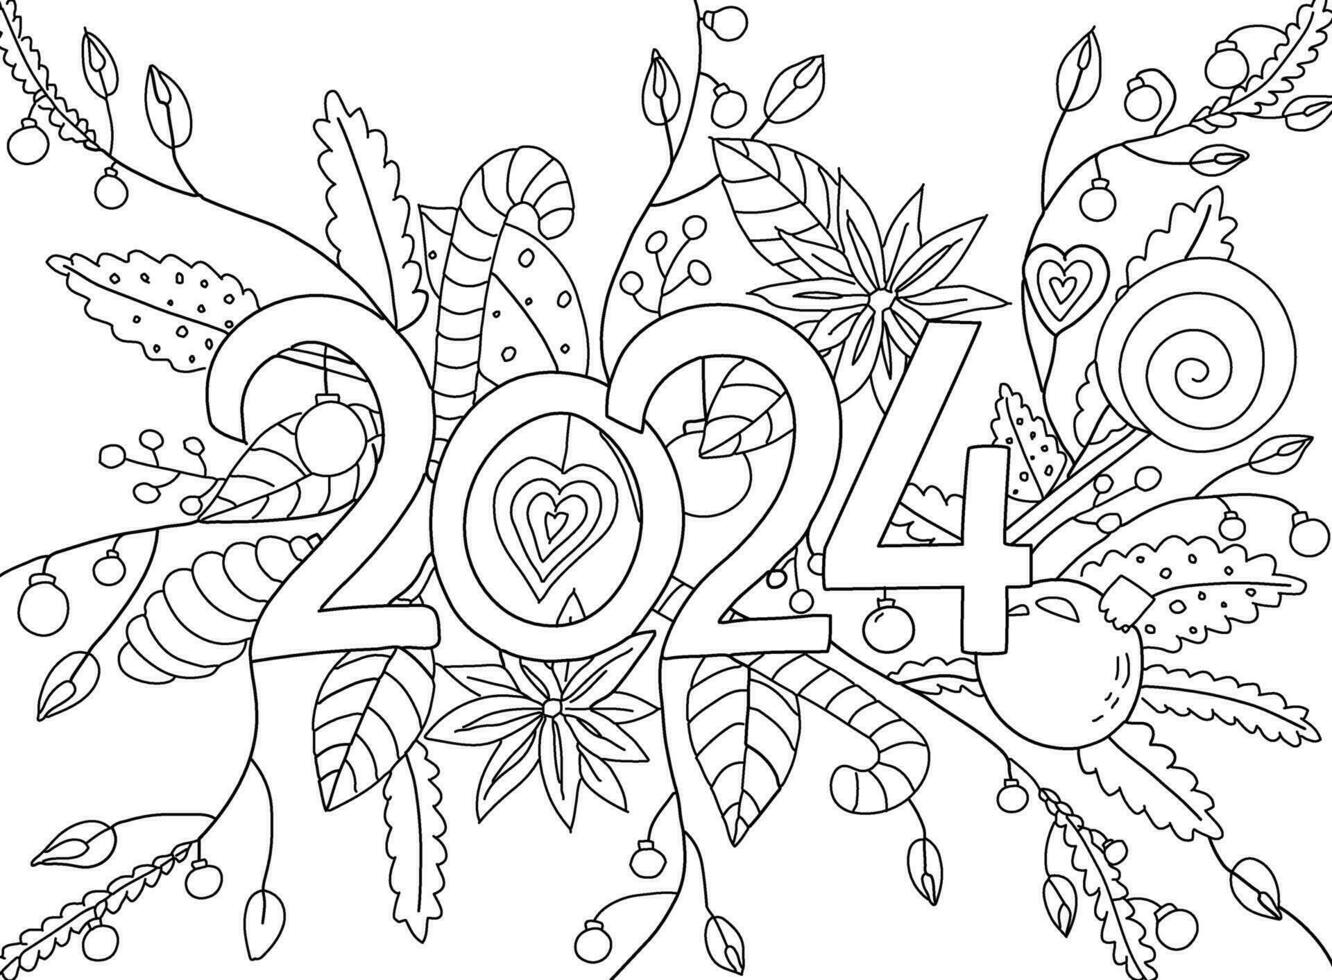 Hand drawing coloring page for kids and adults. Holiday greeting card